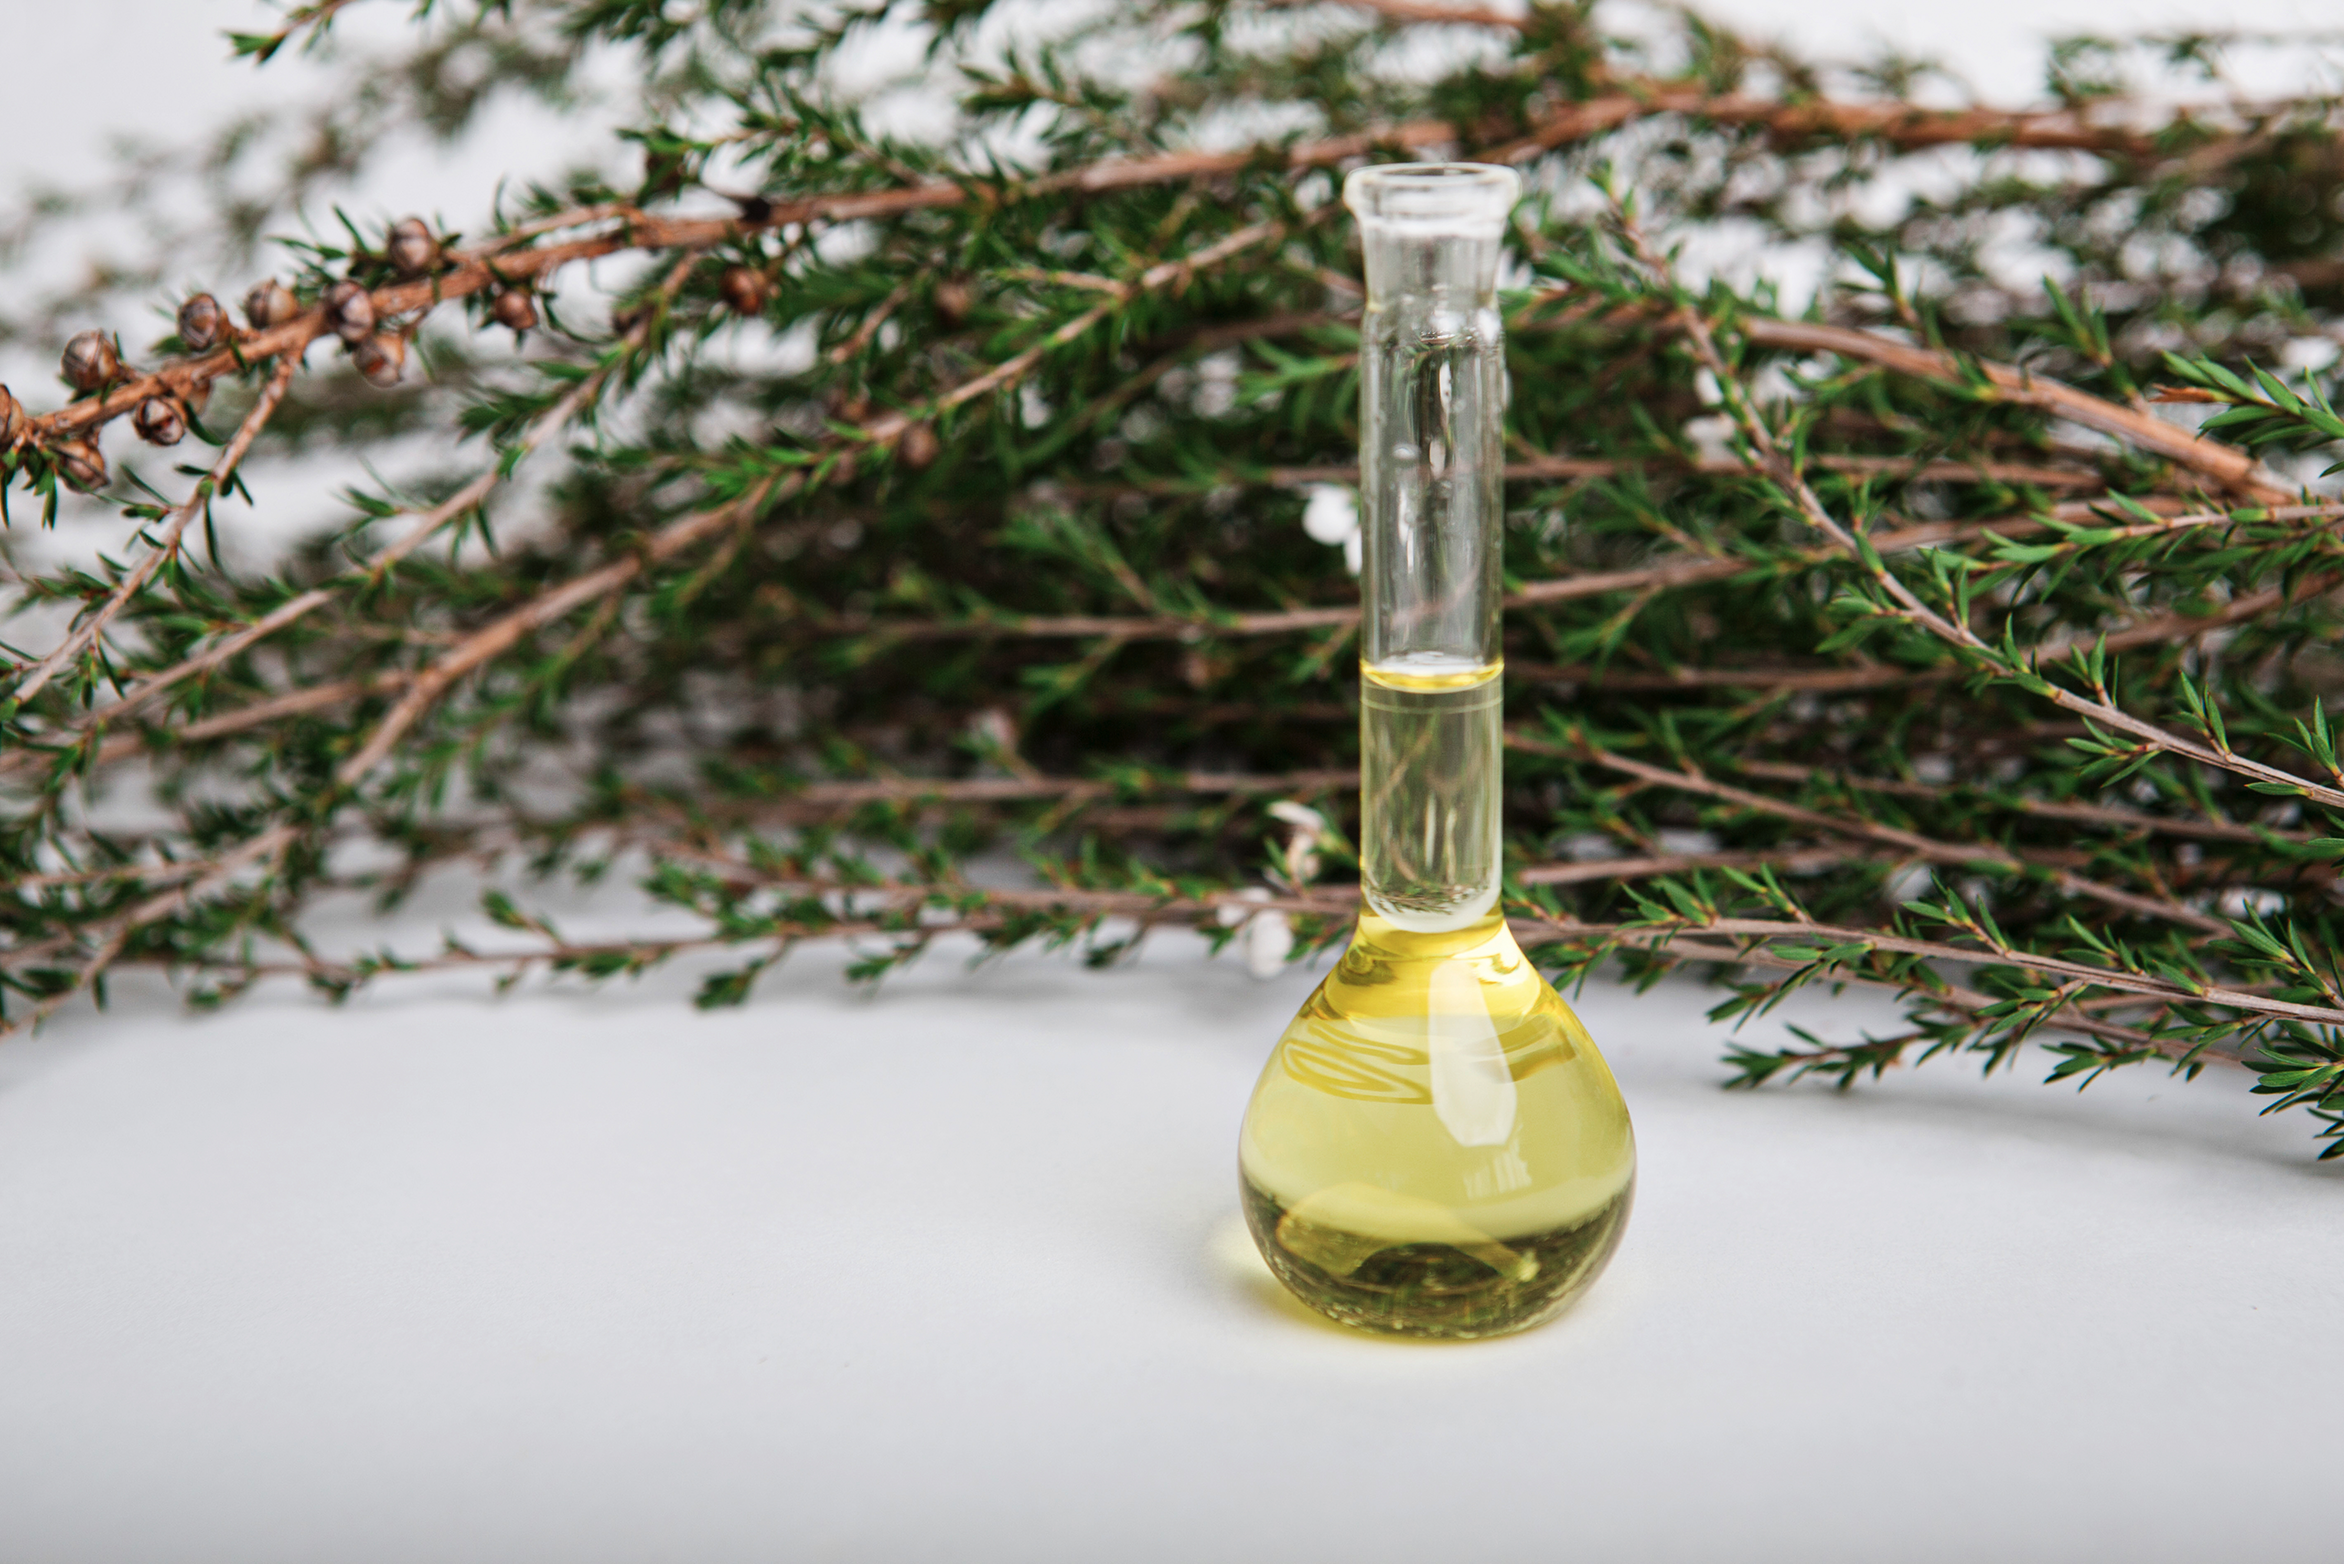 What is Mānuka Oil and how can it be used & compared to Tea Tree Oil?